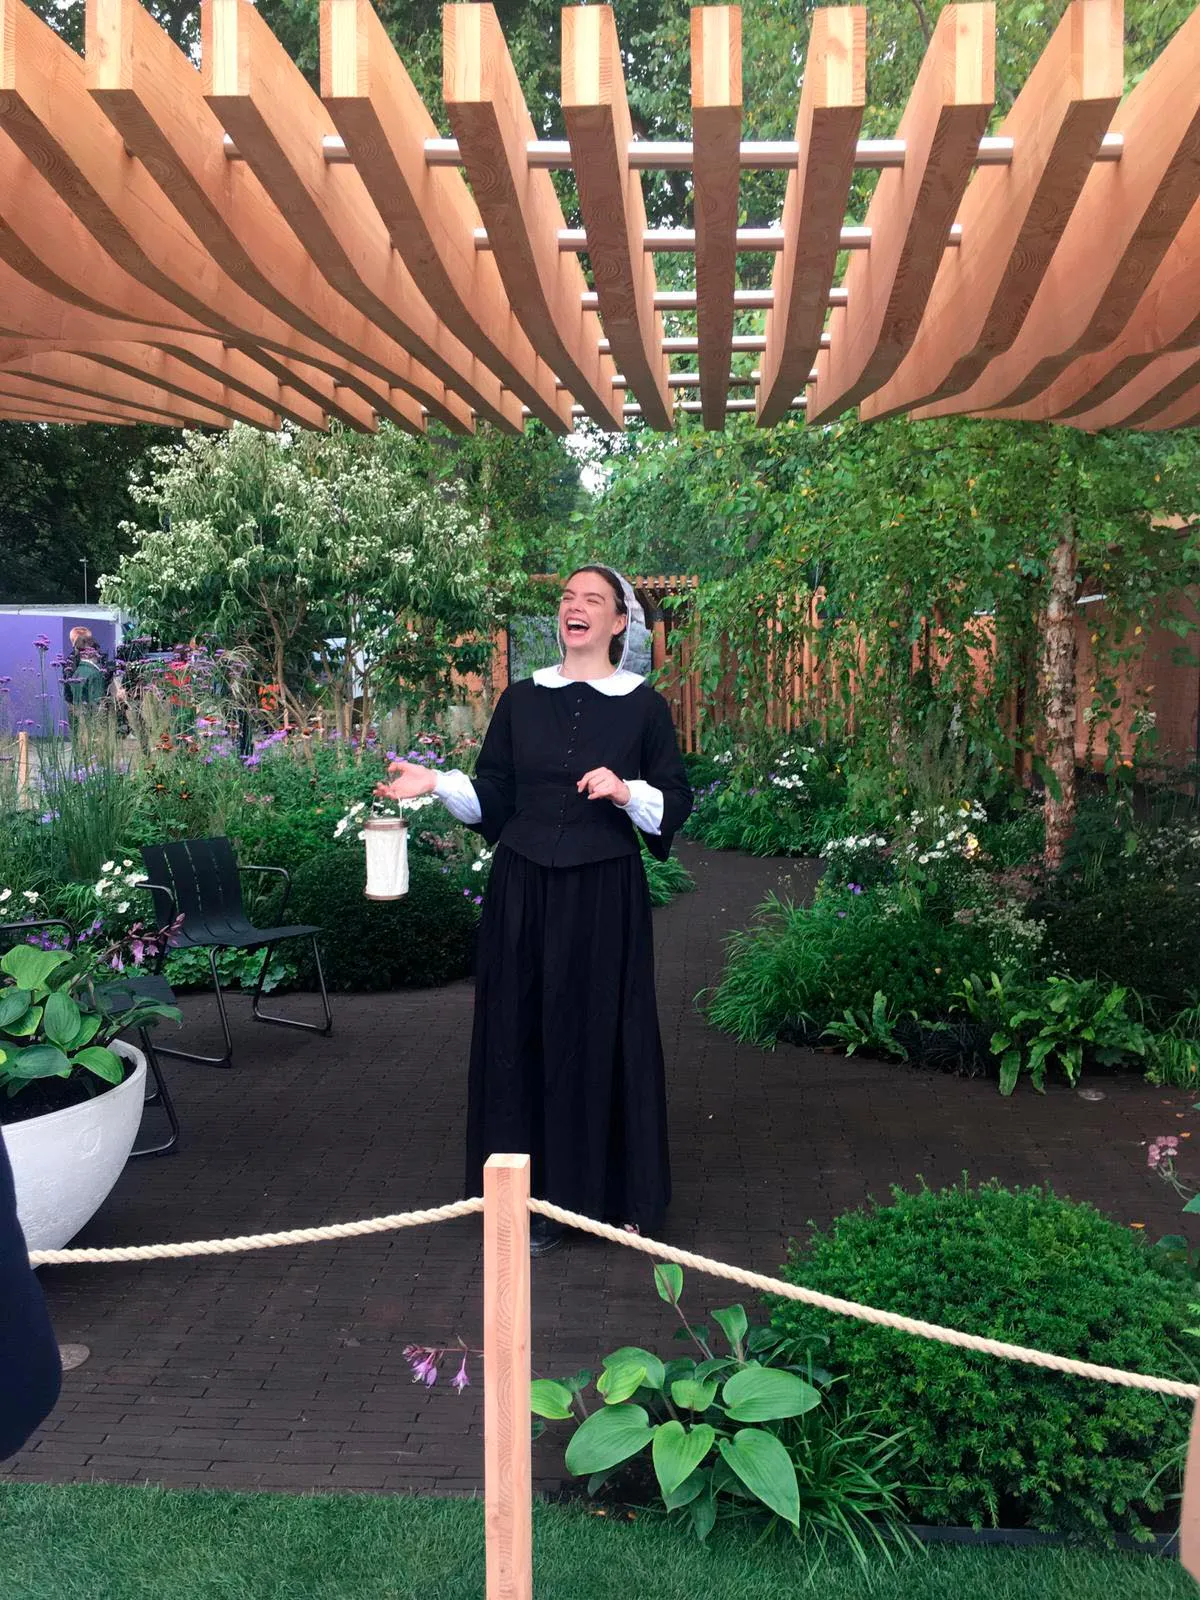 Florence Nightingale Show Garden at Chelsea 2021